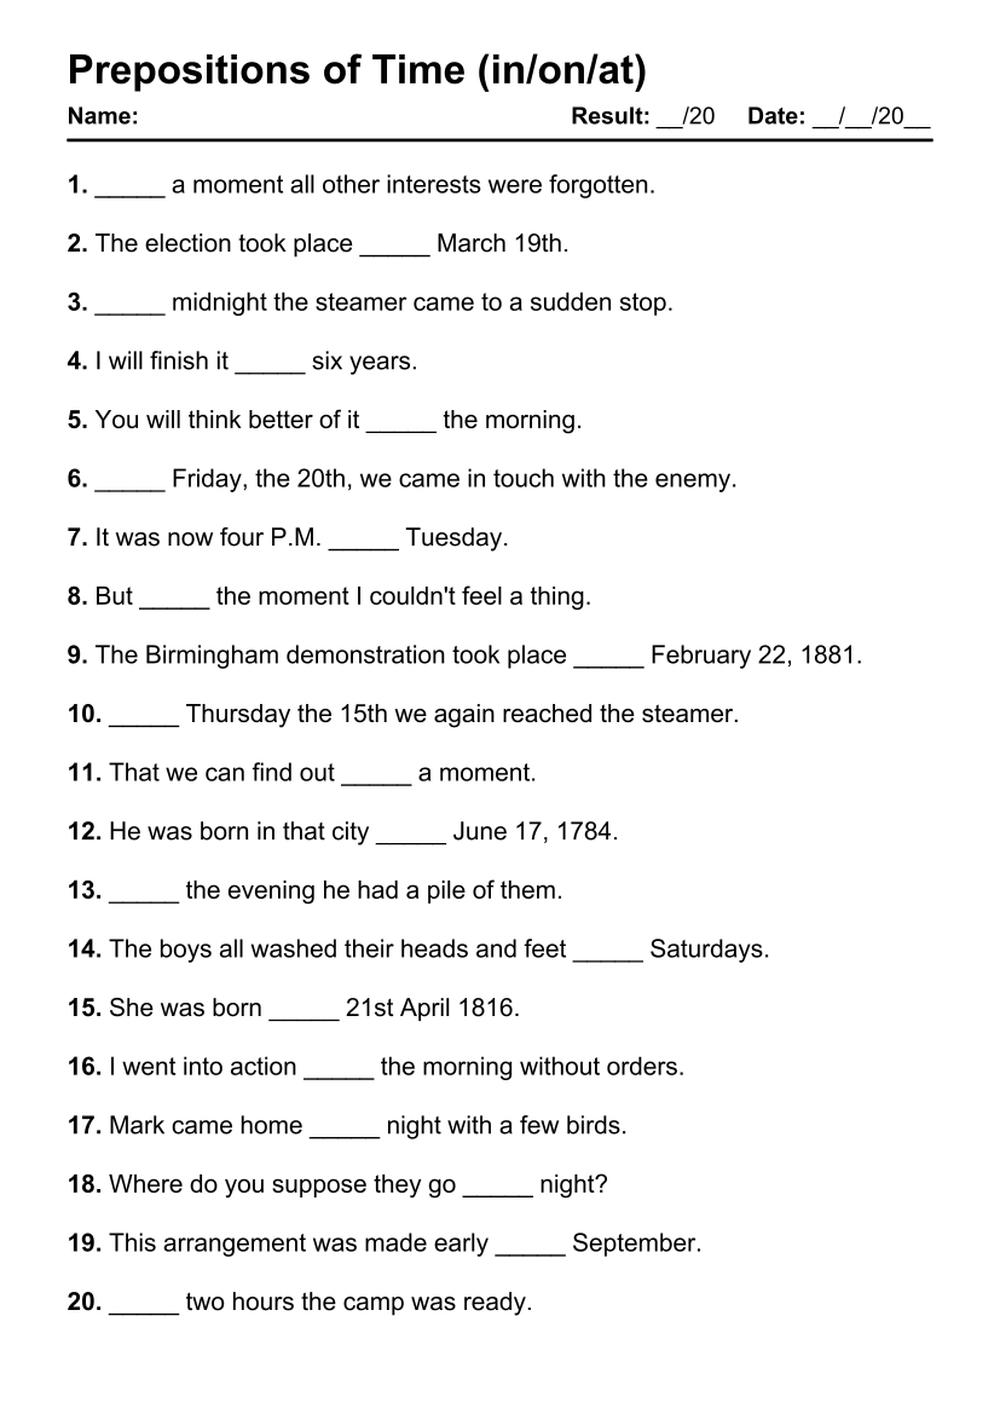 Printable Prepositions of Time Exercises - PDF Worksheet with Answers - Test 32